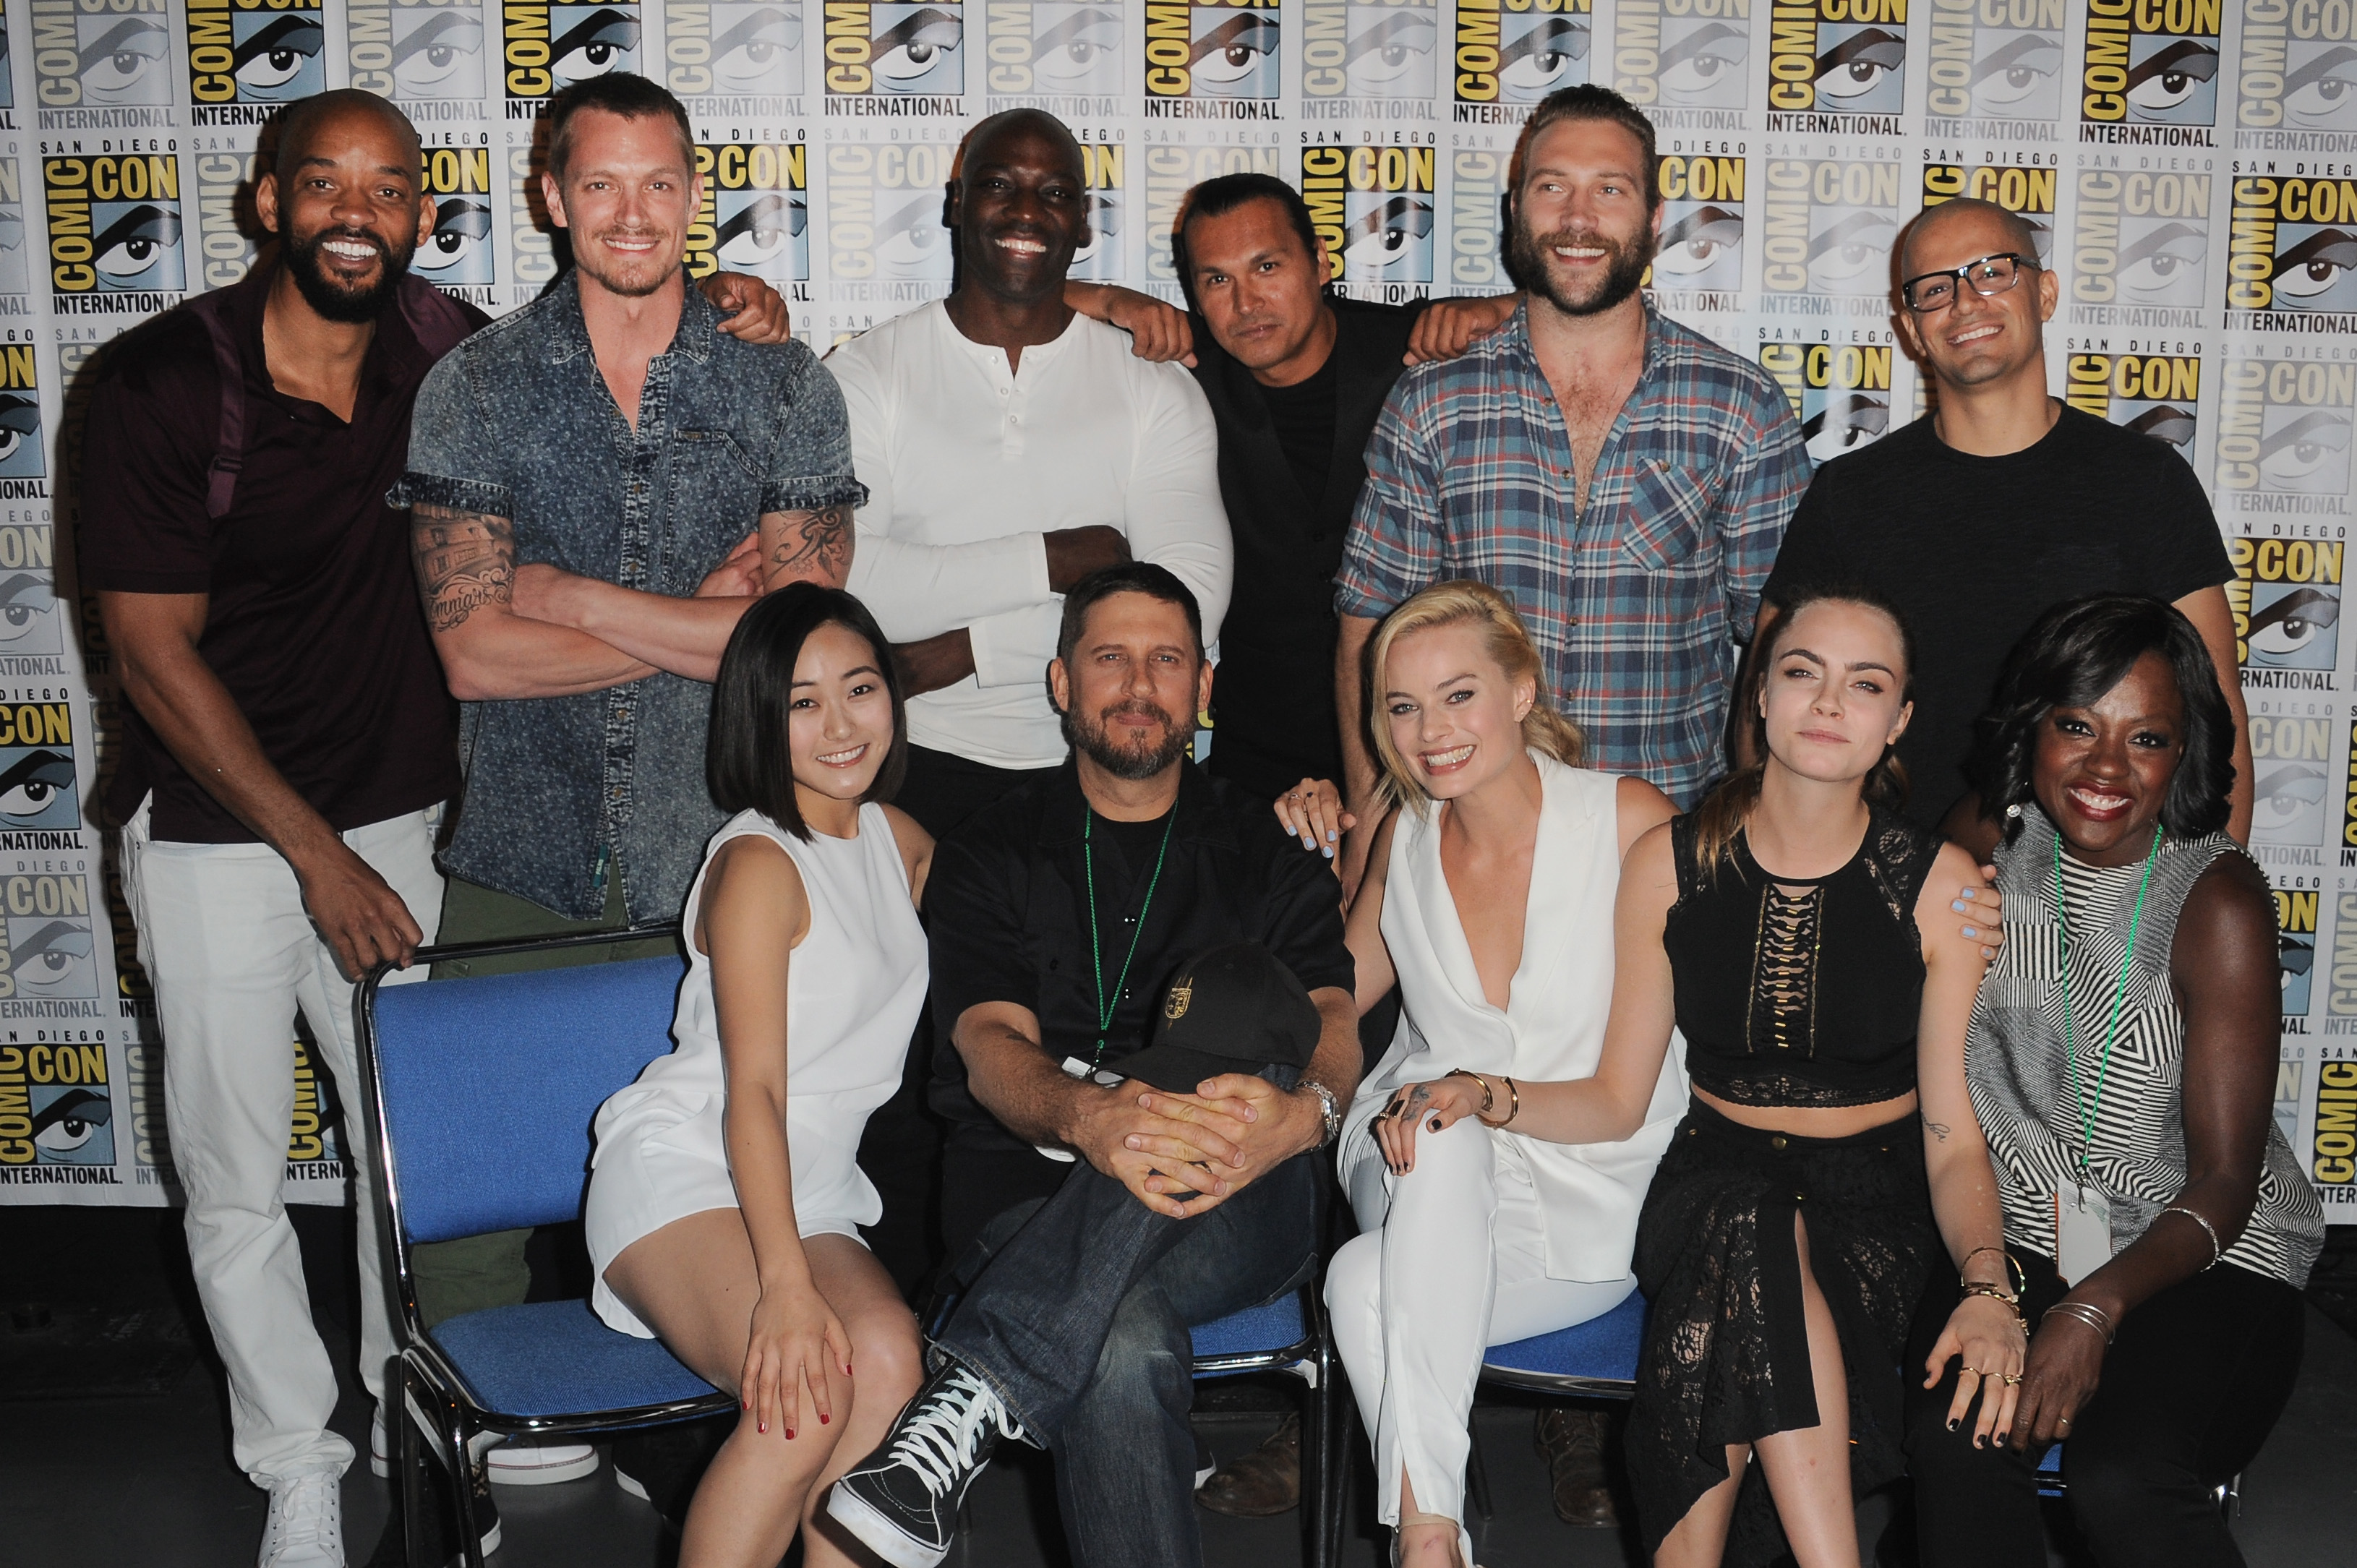 Suicide Squad Cast attends the Warner Bros. presentation during Comic-Con International 2015 at the San Diego Convention Center on July 11, 2015 in San Diego, California. (Albert L. Ortega—Getty Images)